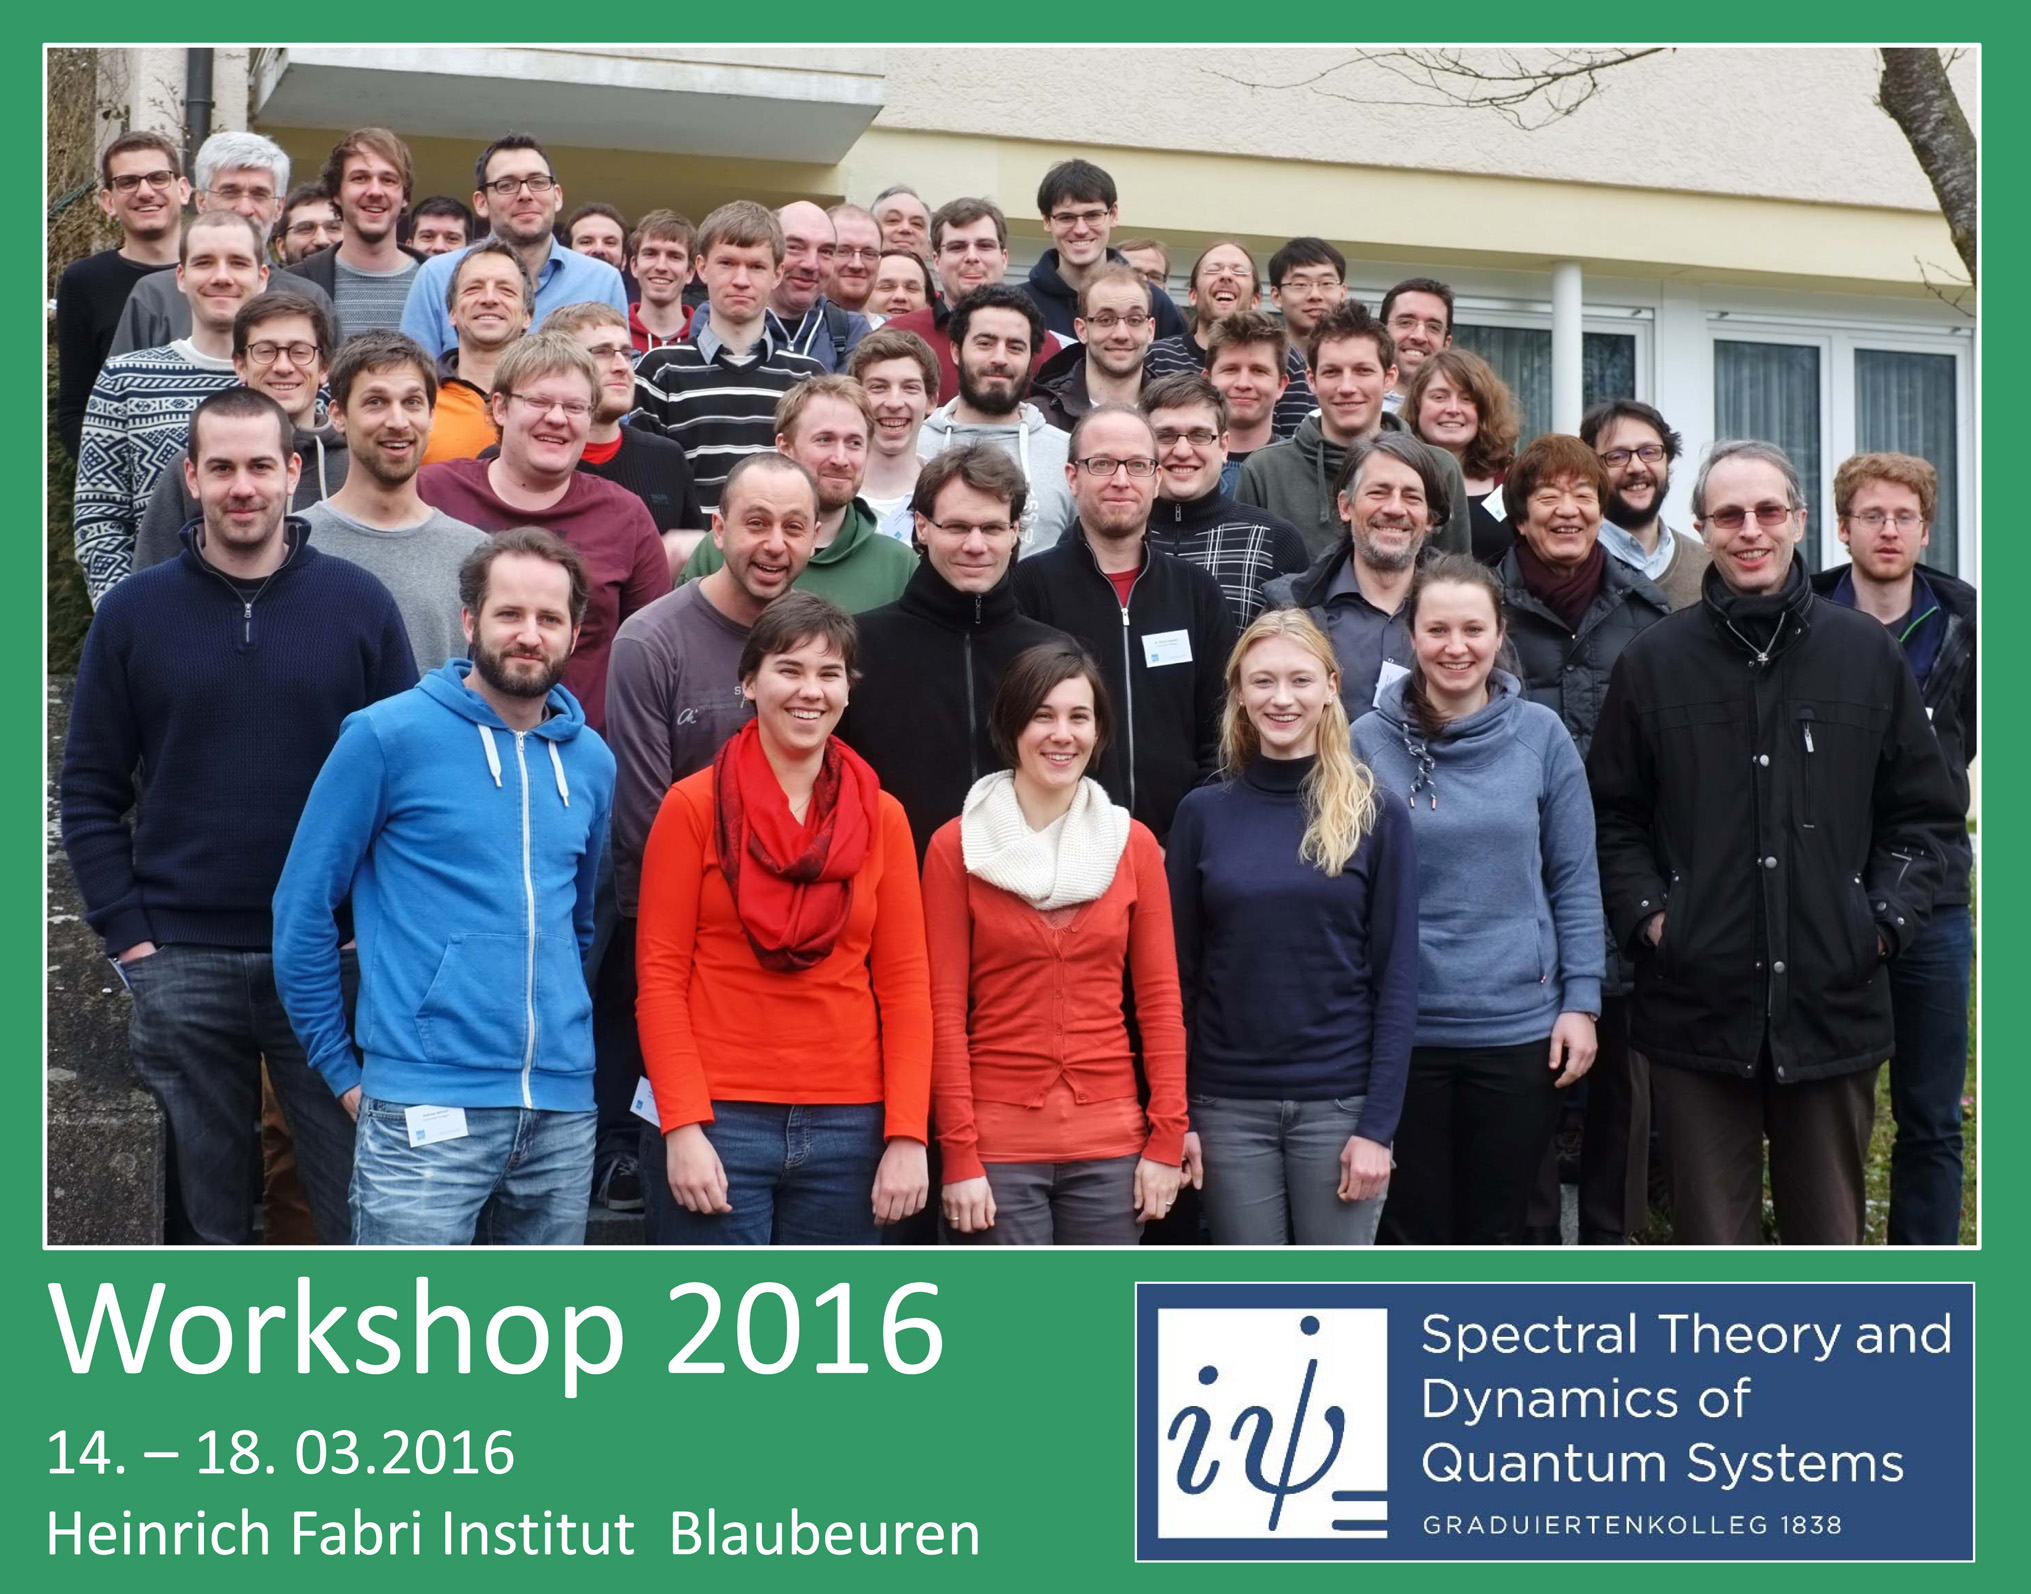 Group Photo of the Blaubeuren Workshop 2016 (with kind permission of RTG 1838, photograph taken by Prof. Christian Lubich)